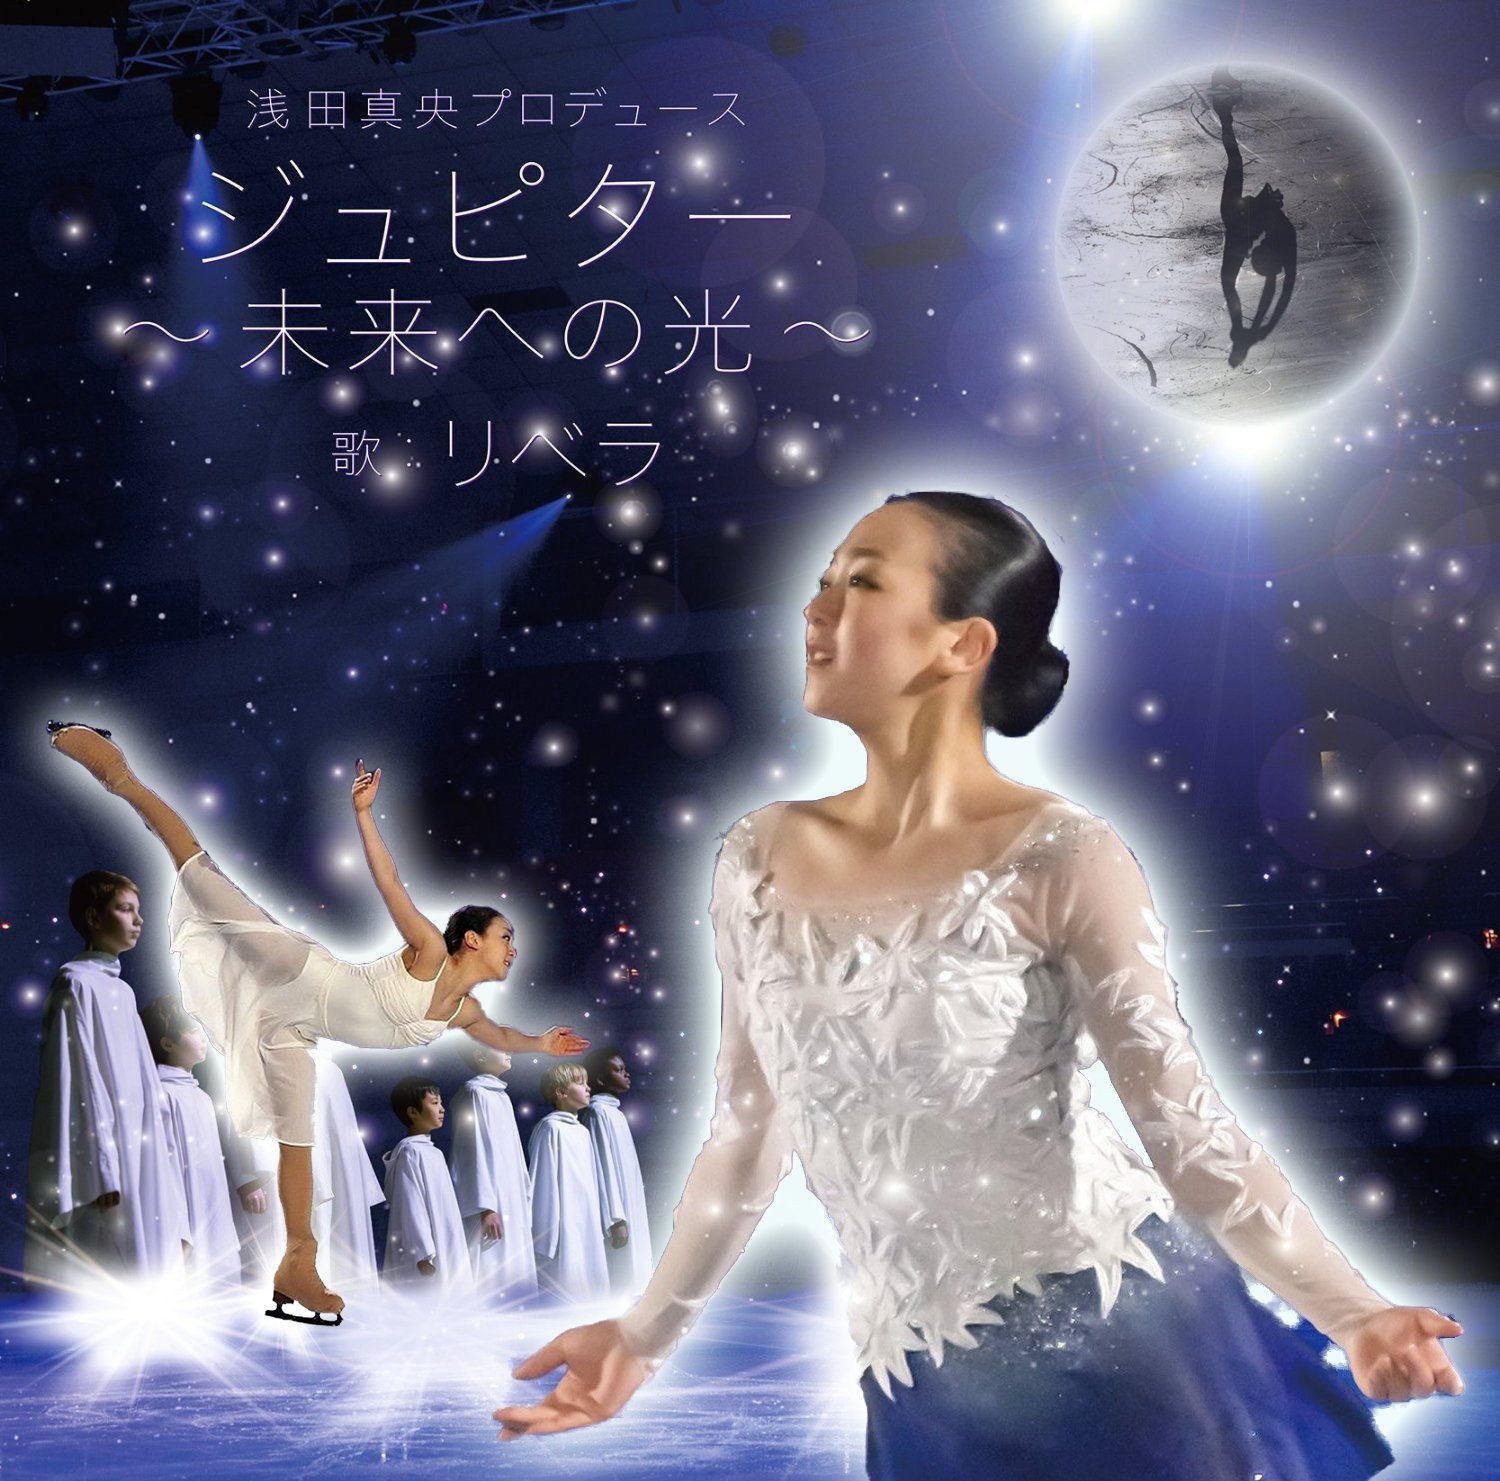 Happy 30th Birthday to Mao Asada! And MANY more Happy Returns of the Day! 